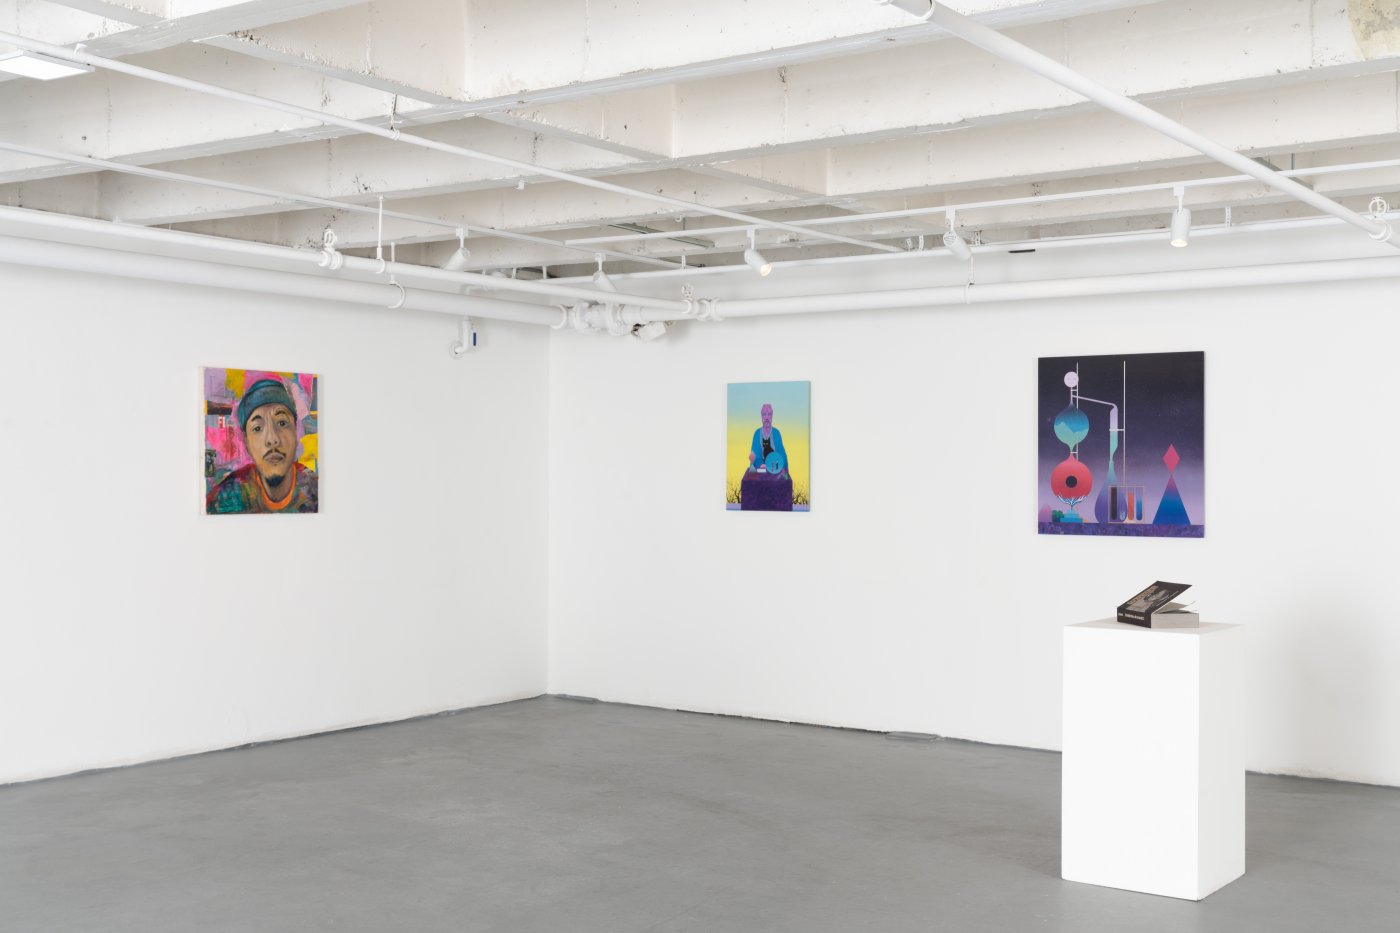 Installation image for Southland Vol. 2, at Charlie James Gallery